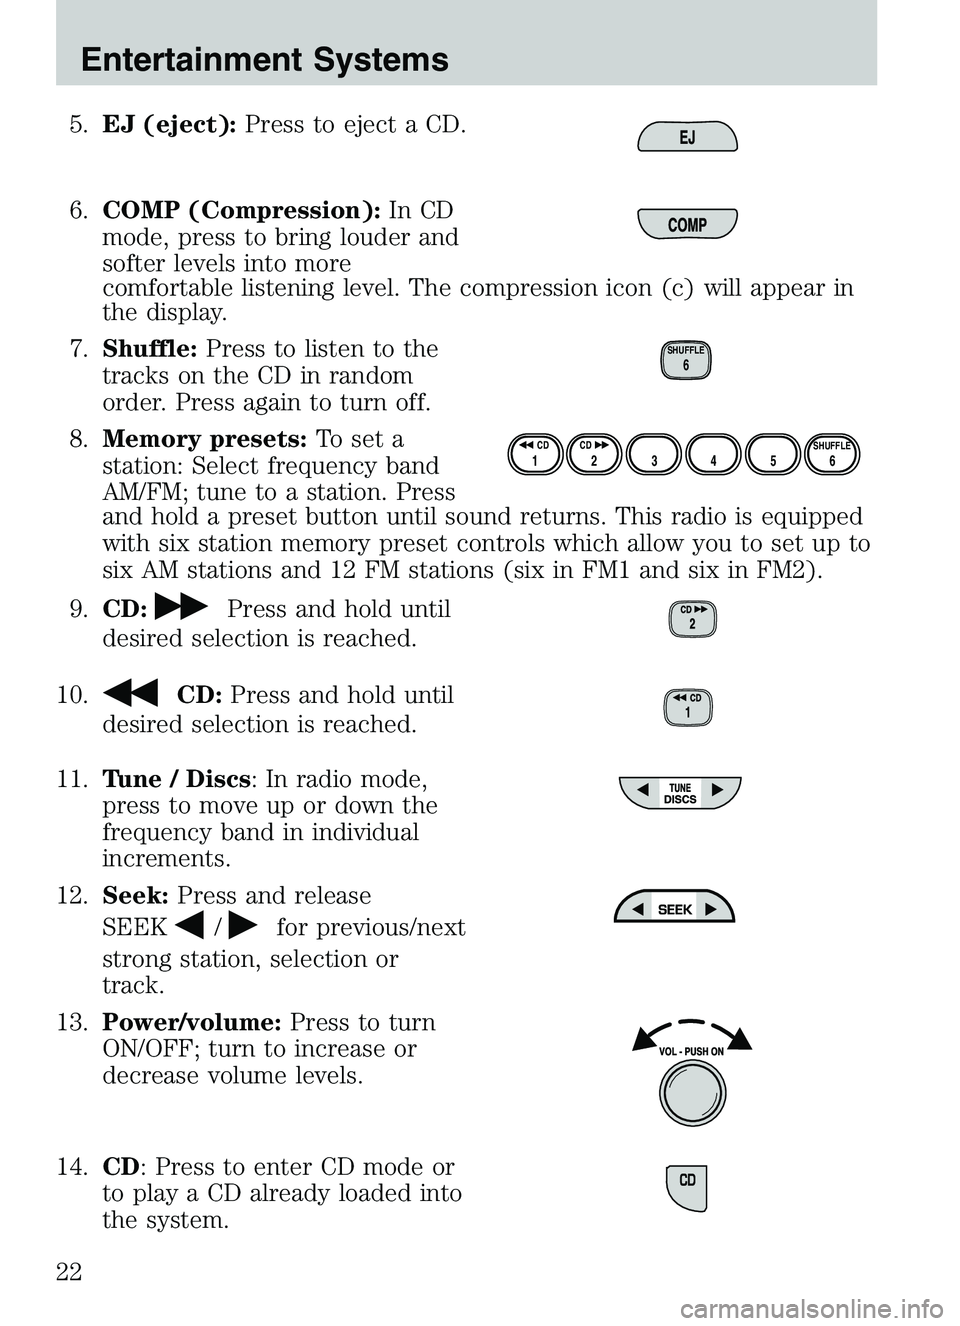 MAZDA MODEL B4000 2003  Owners Manual 5.EJ (eject): Press to eject a CD.
6. COMP (Compression): In CD
mode, press to bring louder and
softer levels into more
comfortable listening level. The compression icon (c) will appear in
the display